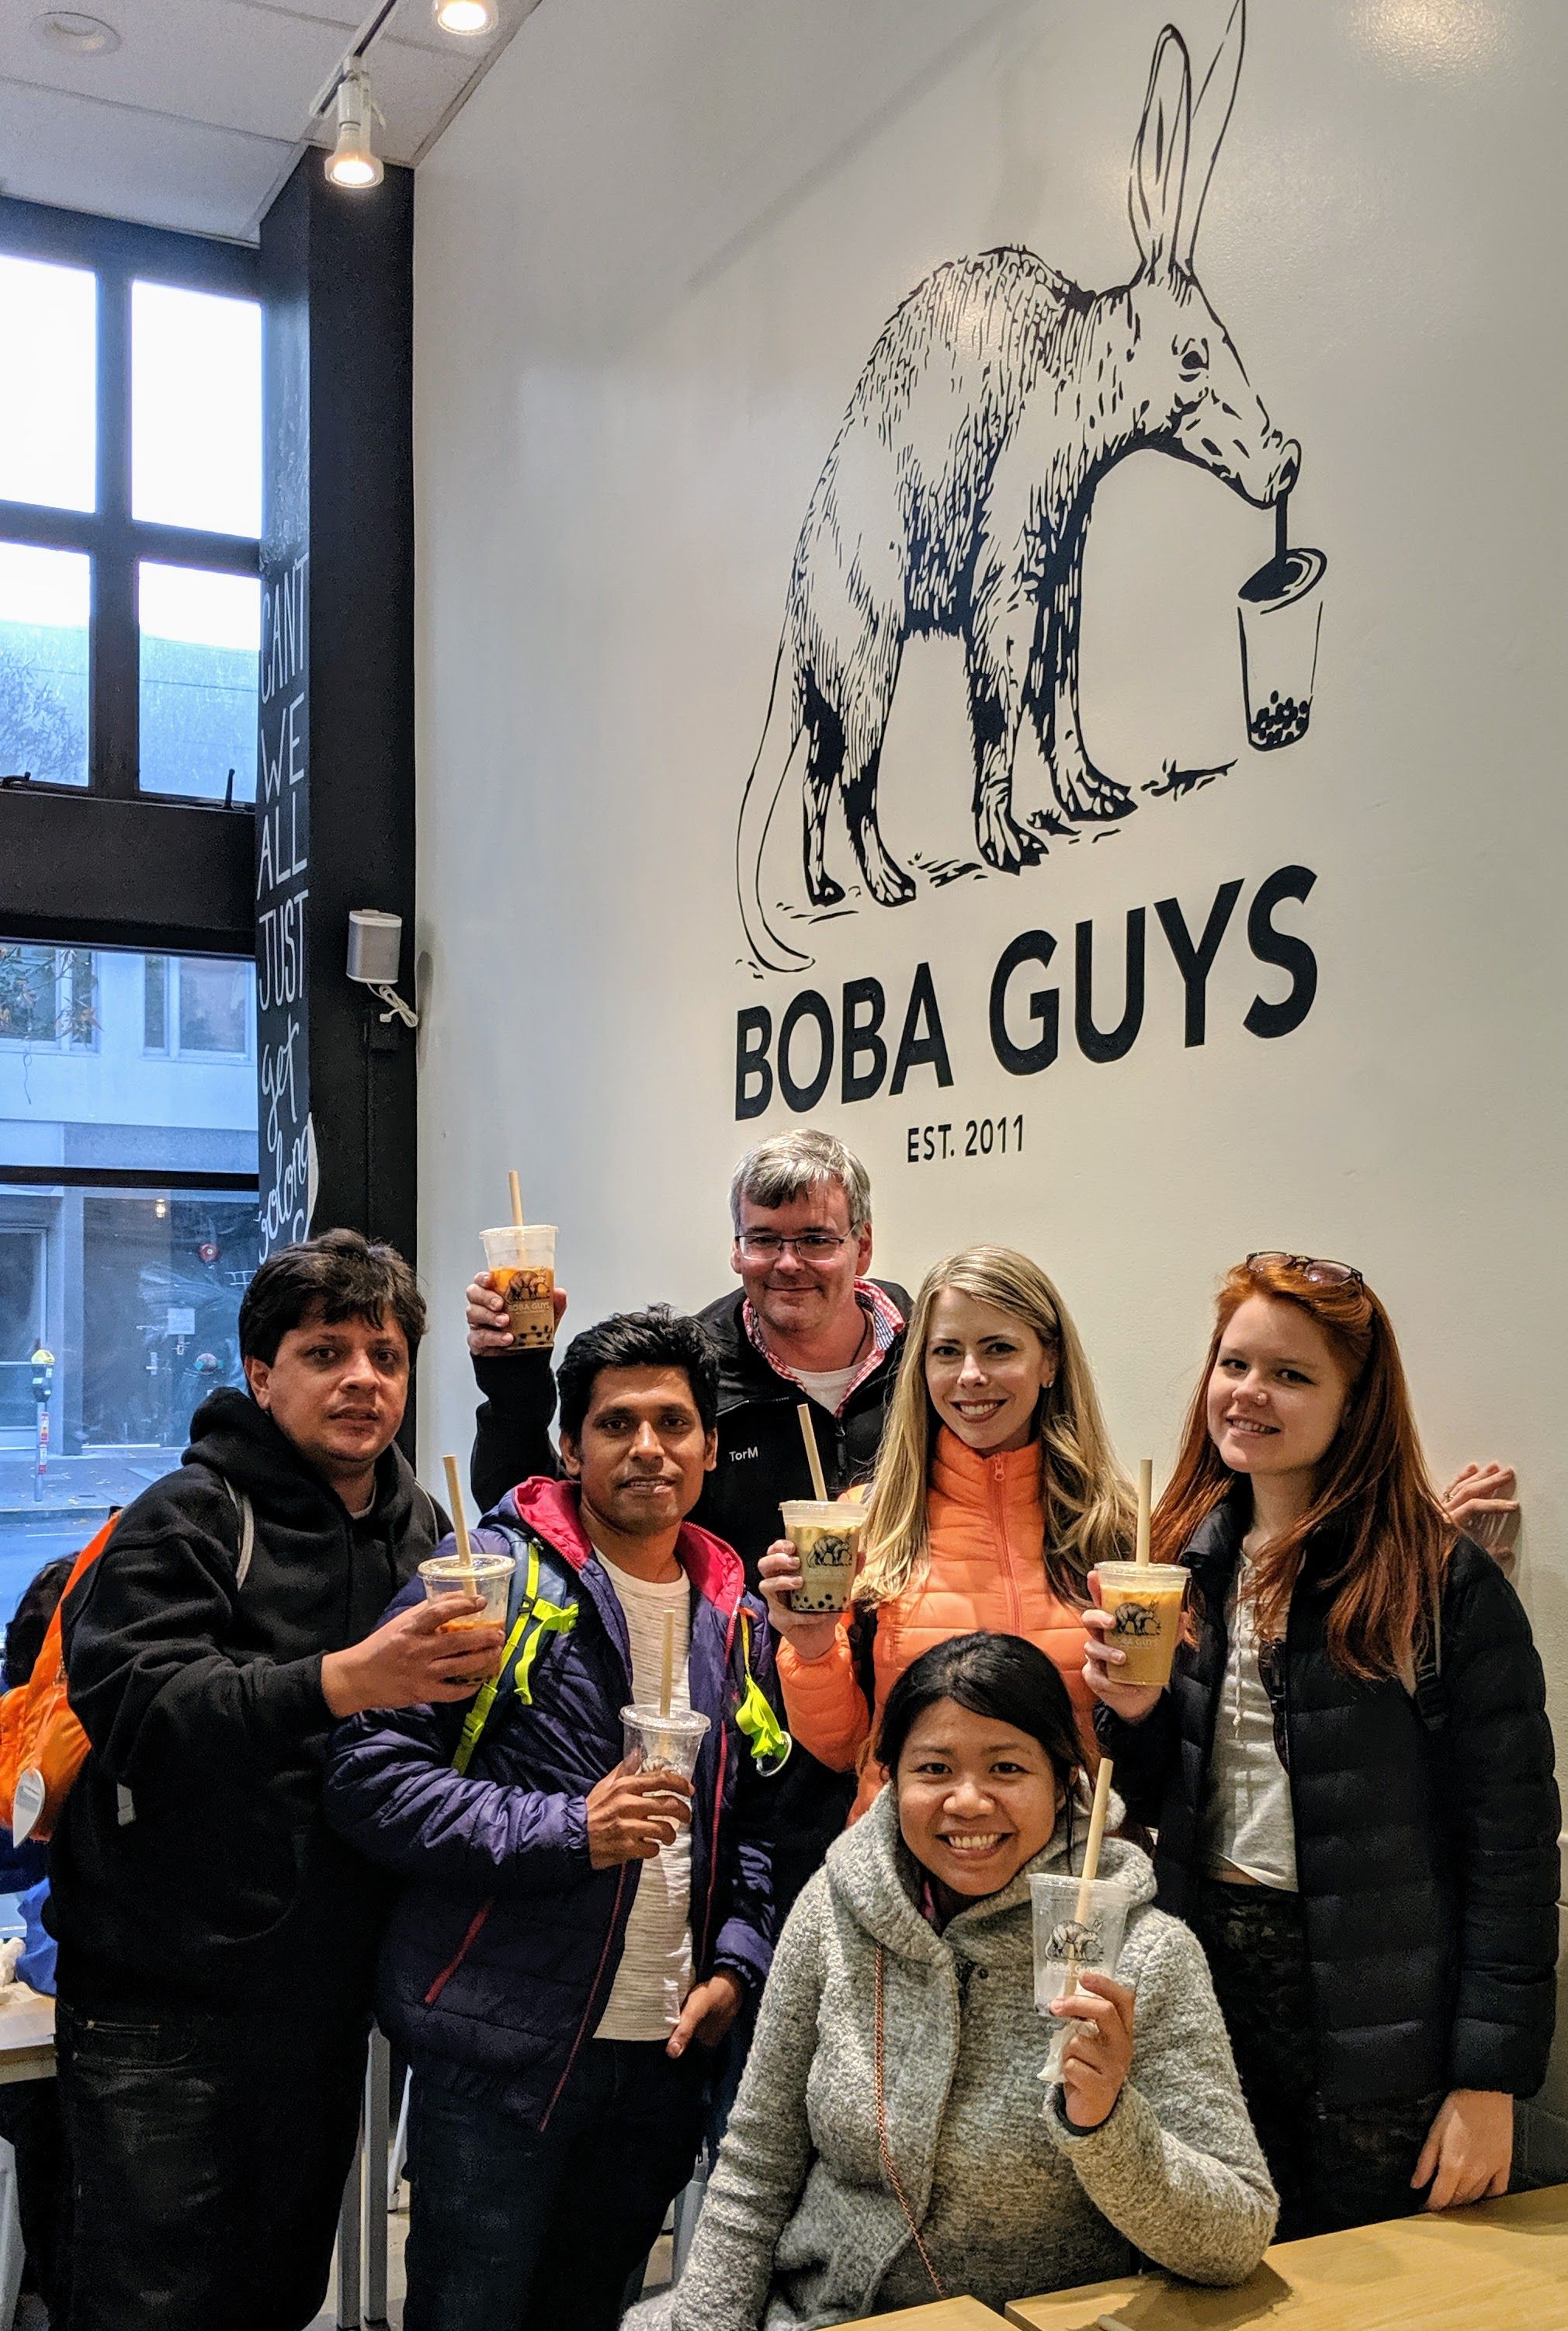 Meeting up with Local Guides from around the world at the famous Boba Guys boba shop in San Francisco, CA 2019